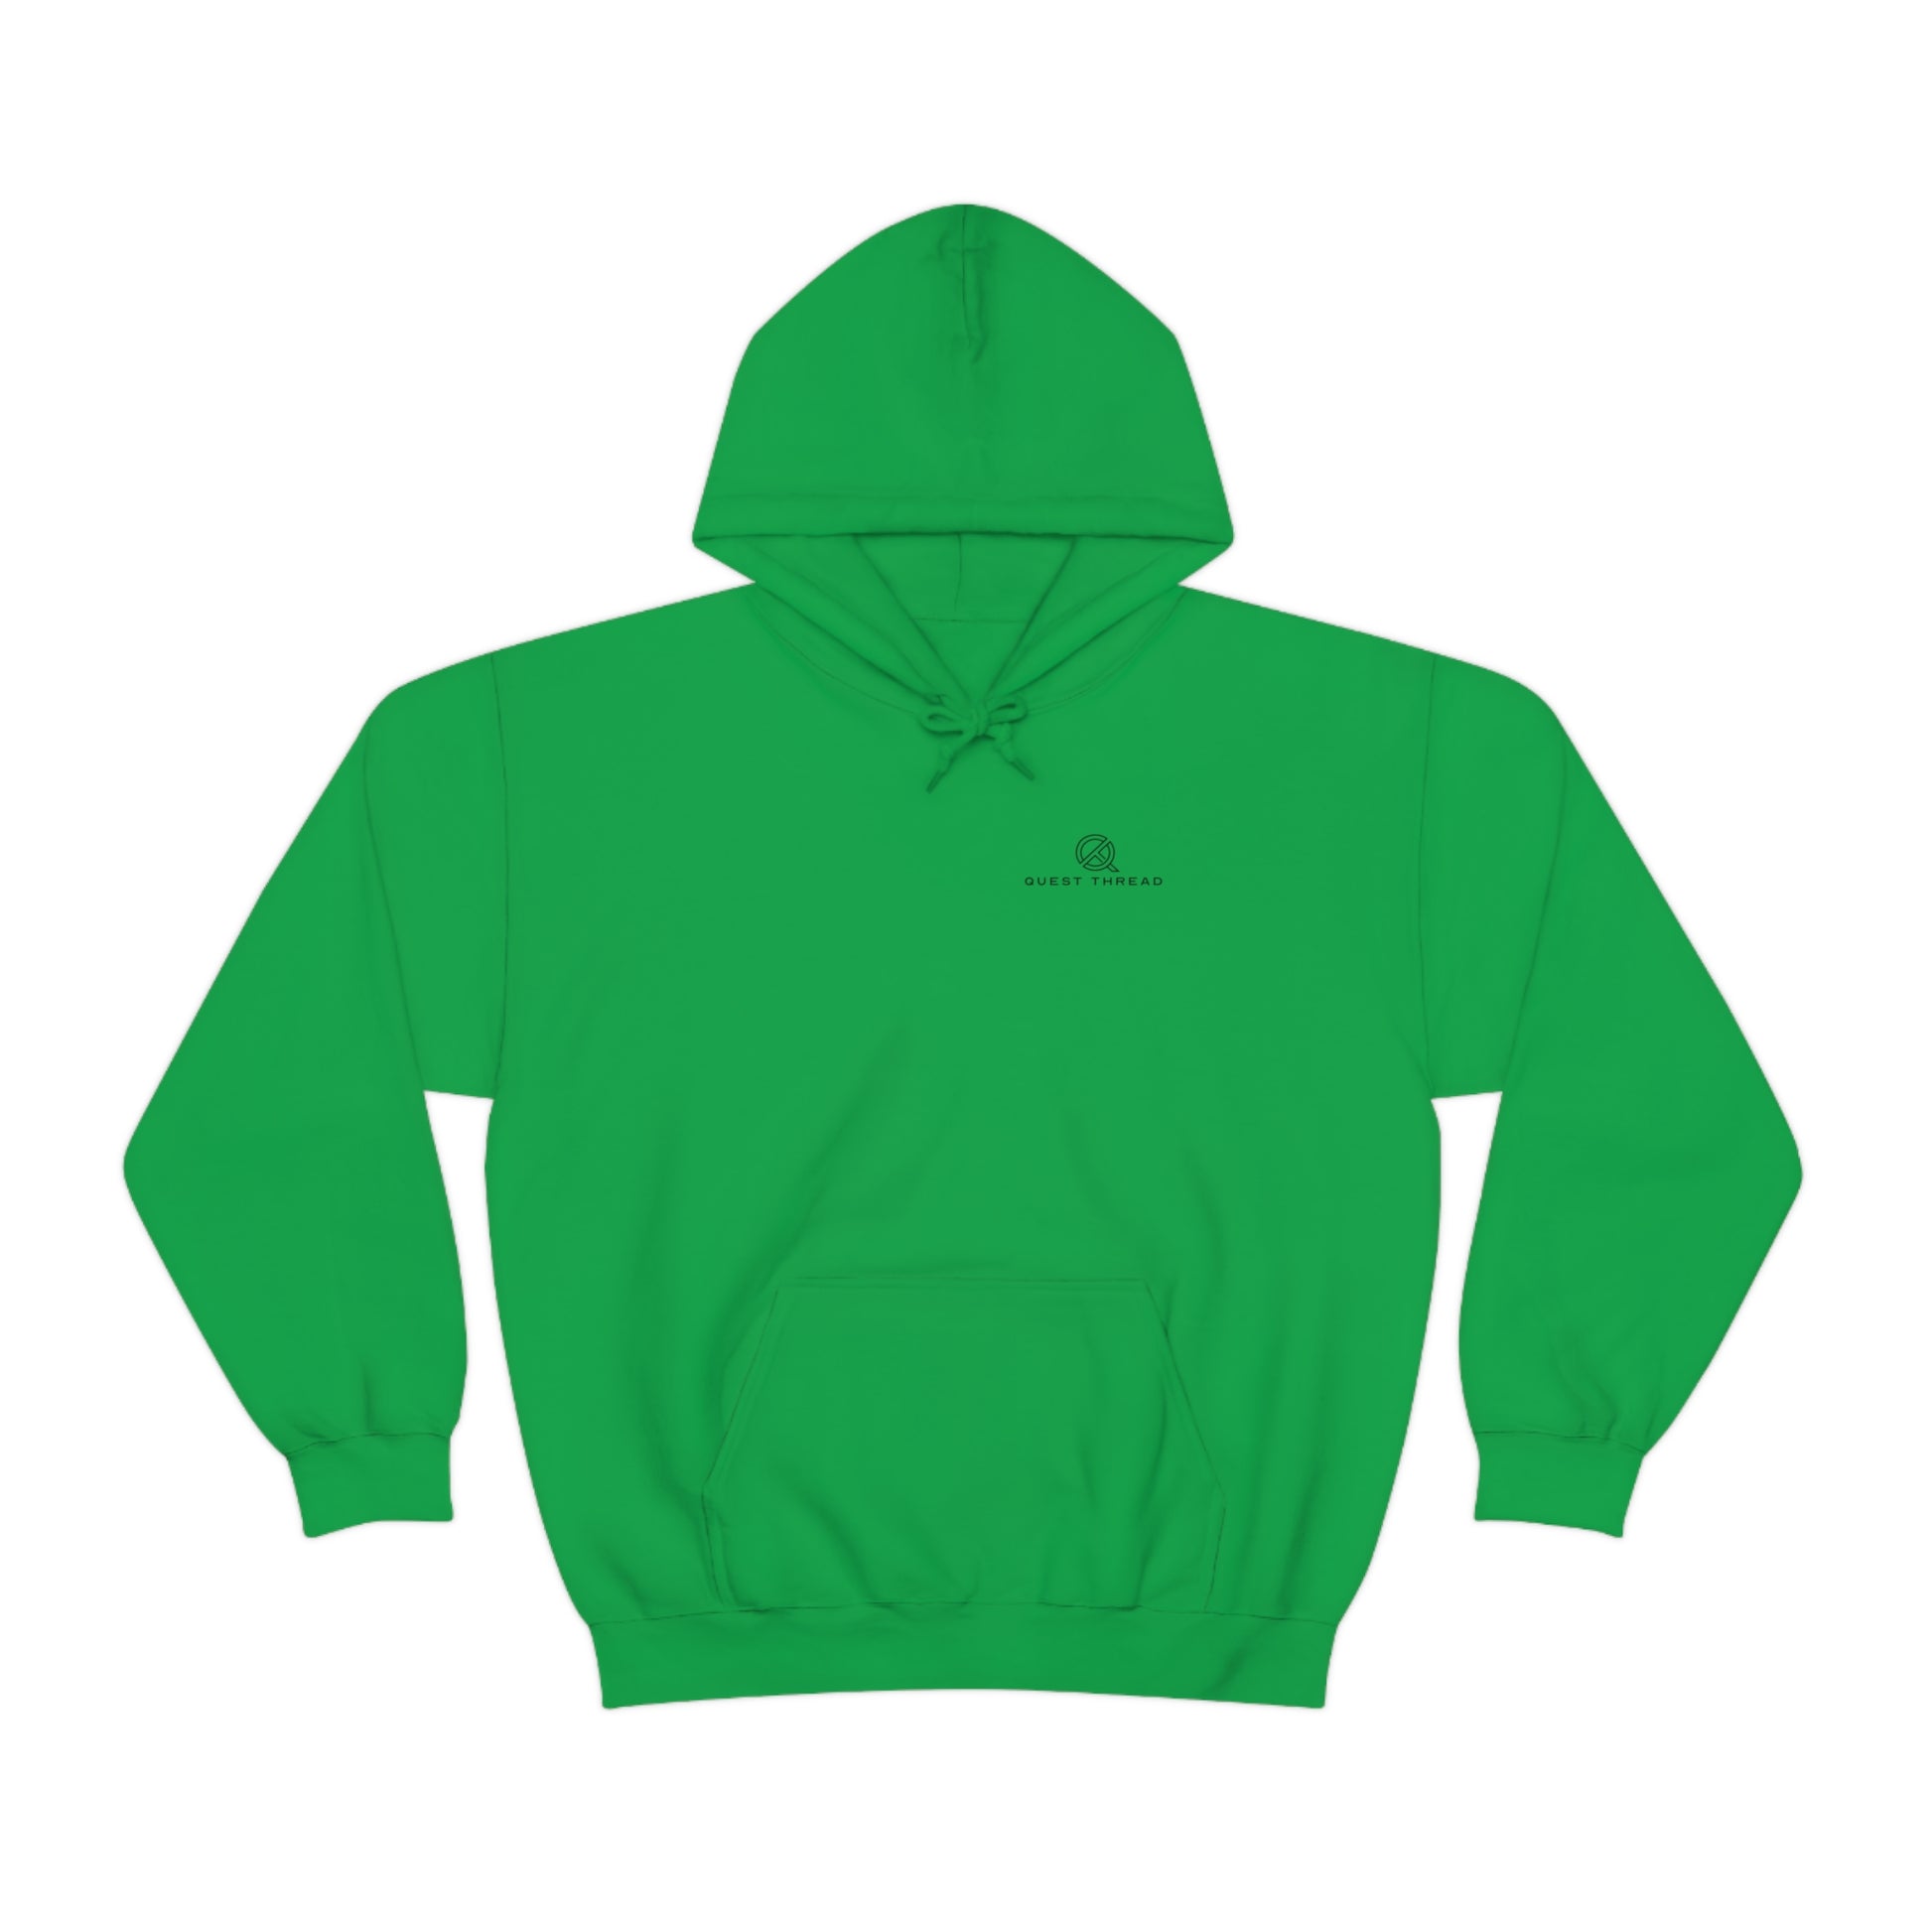 irish-green-quest-thread-hoodie-with-small-logo-on-left-chest